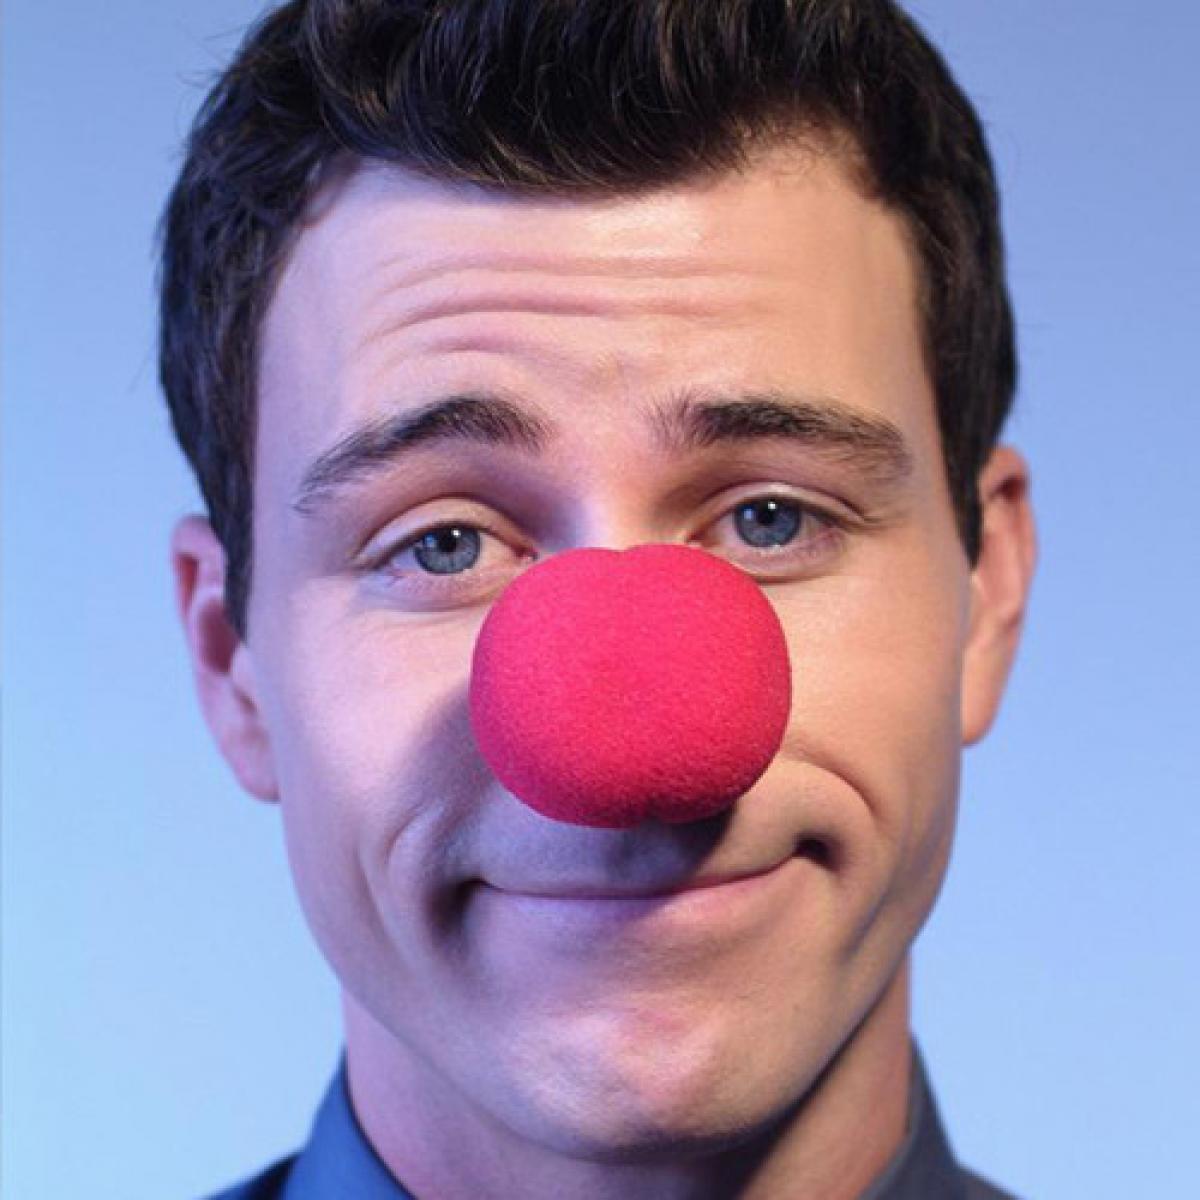 Man With Red Clown Nose Funny Picture